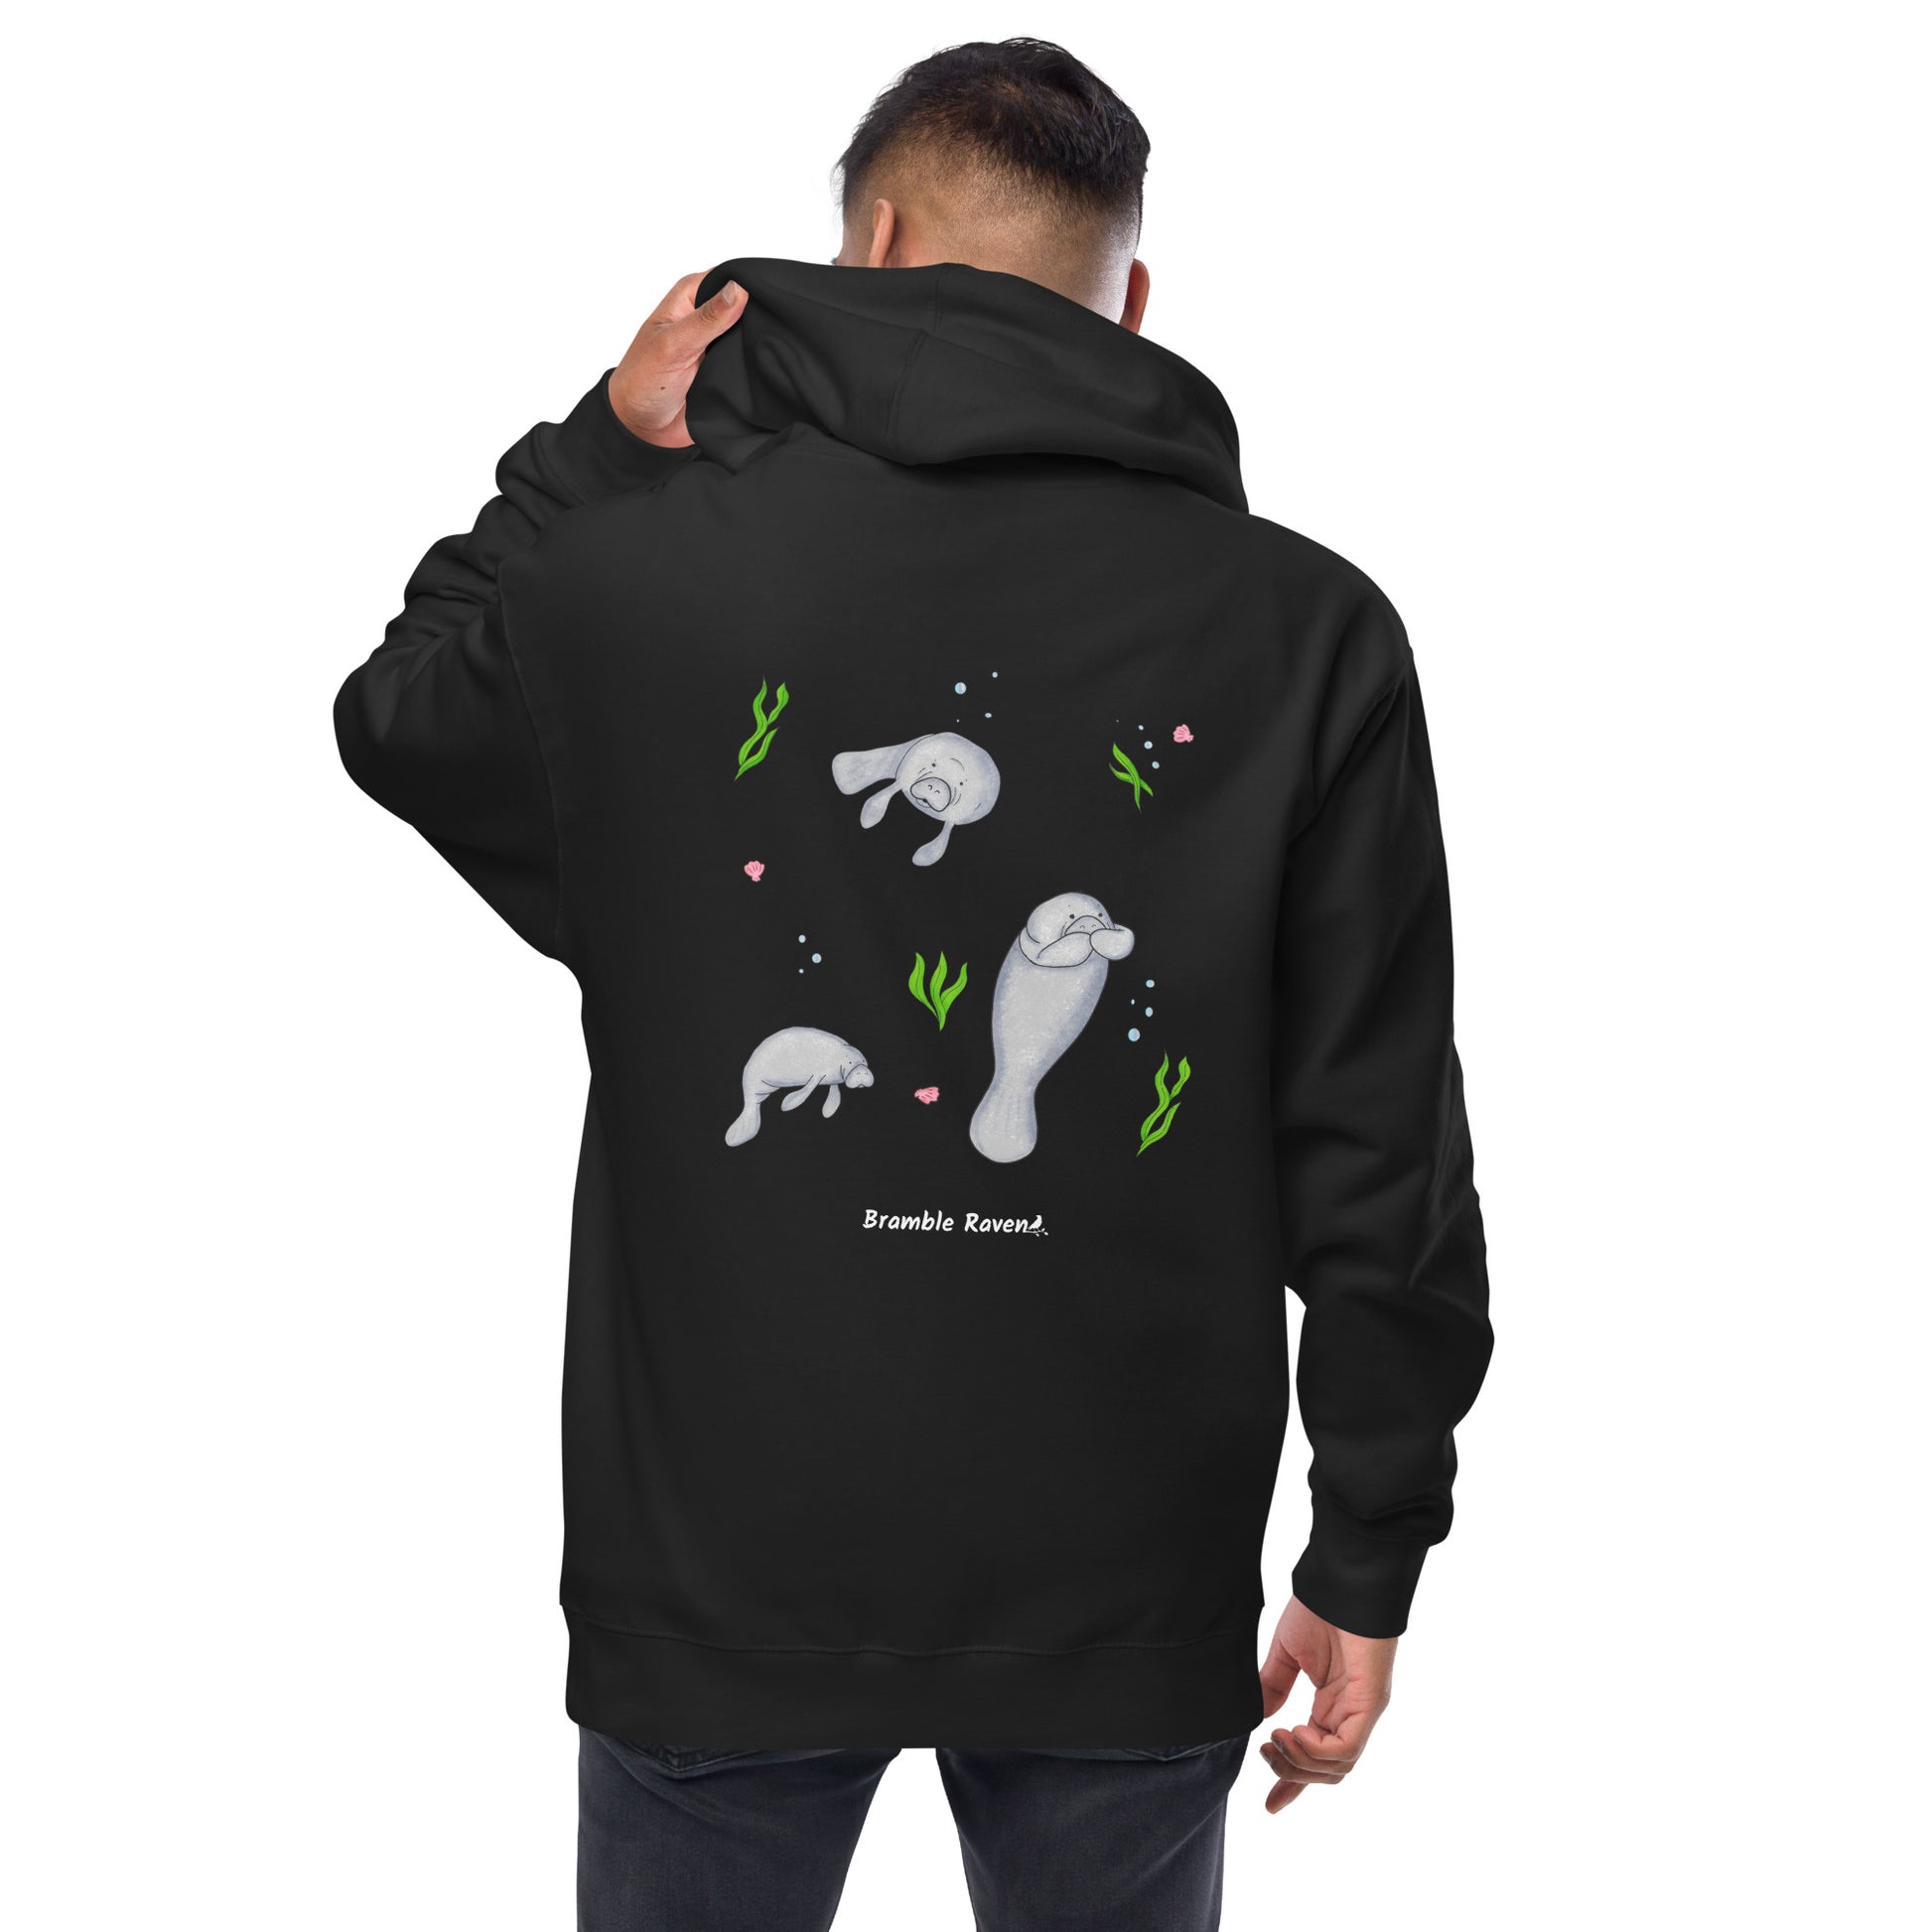 Black colored unisex zip-up hoodie. Features three manatees with seaweed, seashells, and bubbles on the back. It is made of soft, premium quality fleece fabric and has a jersey-lined hood. Made with 100% cotton face and 80% cotton, 20% polyester blend fleece. Features metal eyelets and zipper. Back view shown on male model.